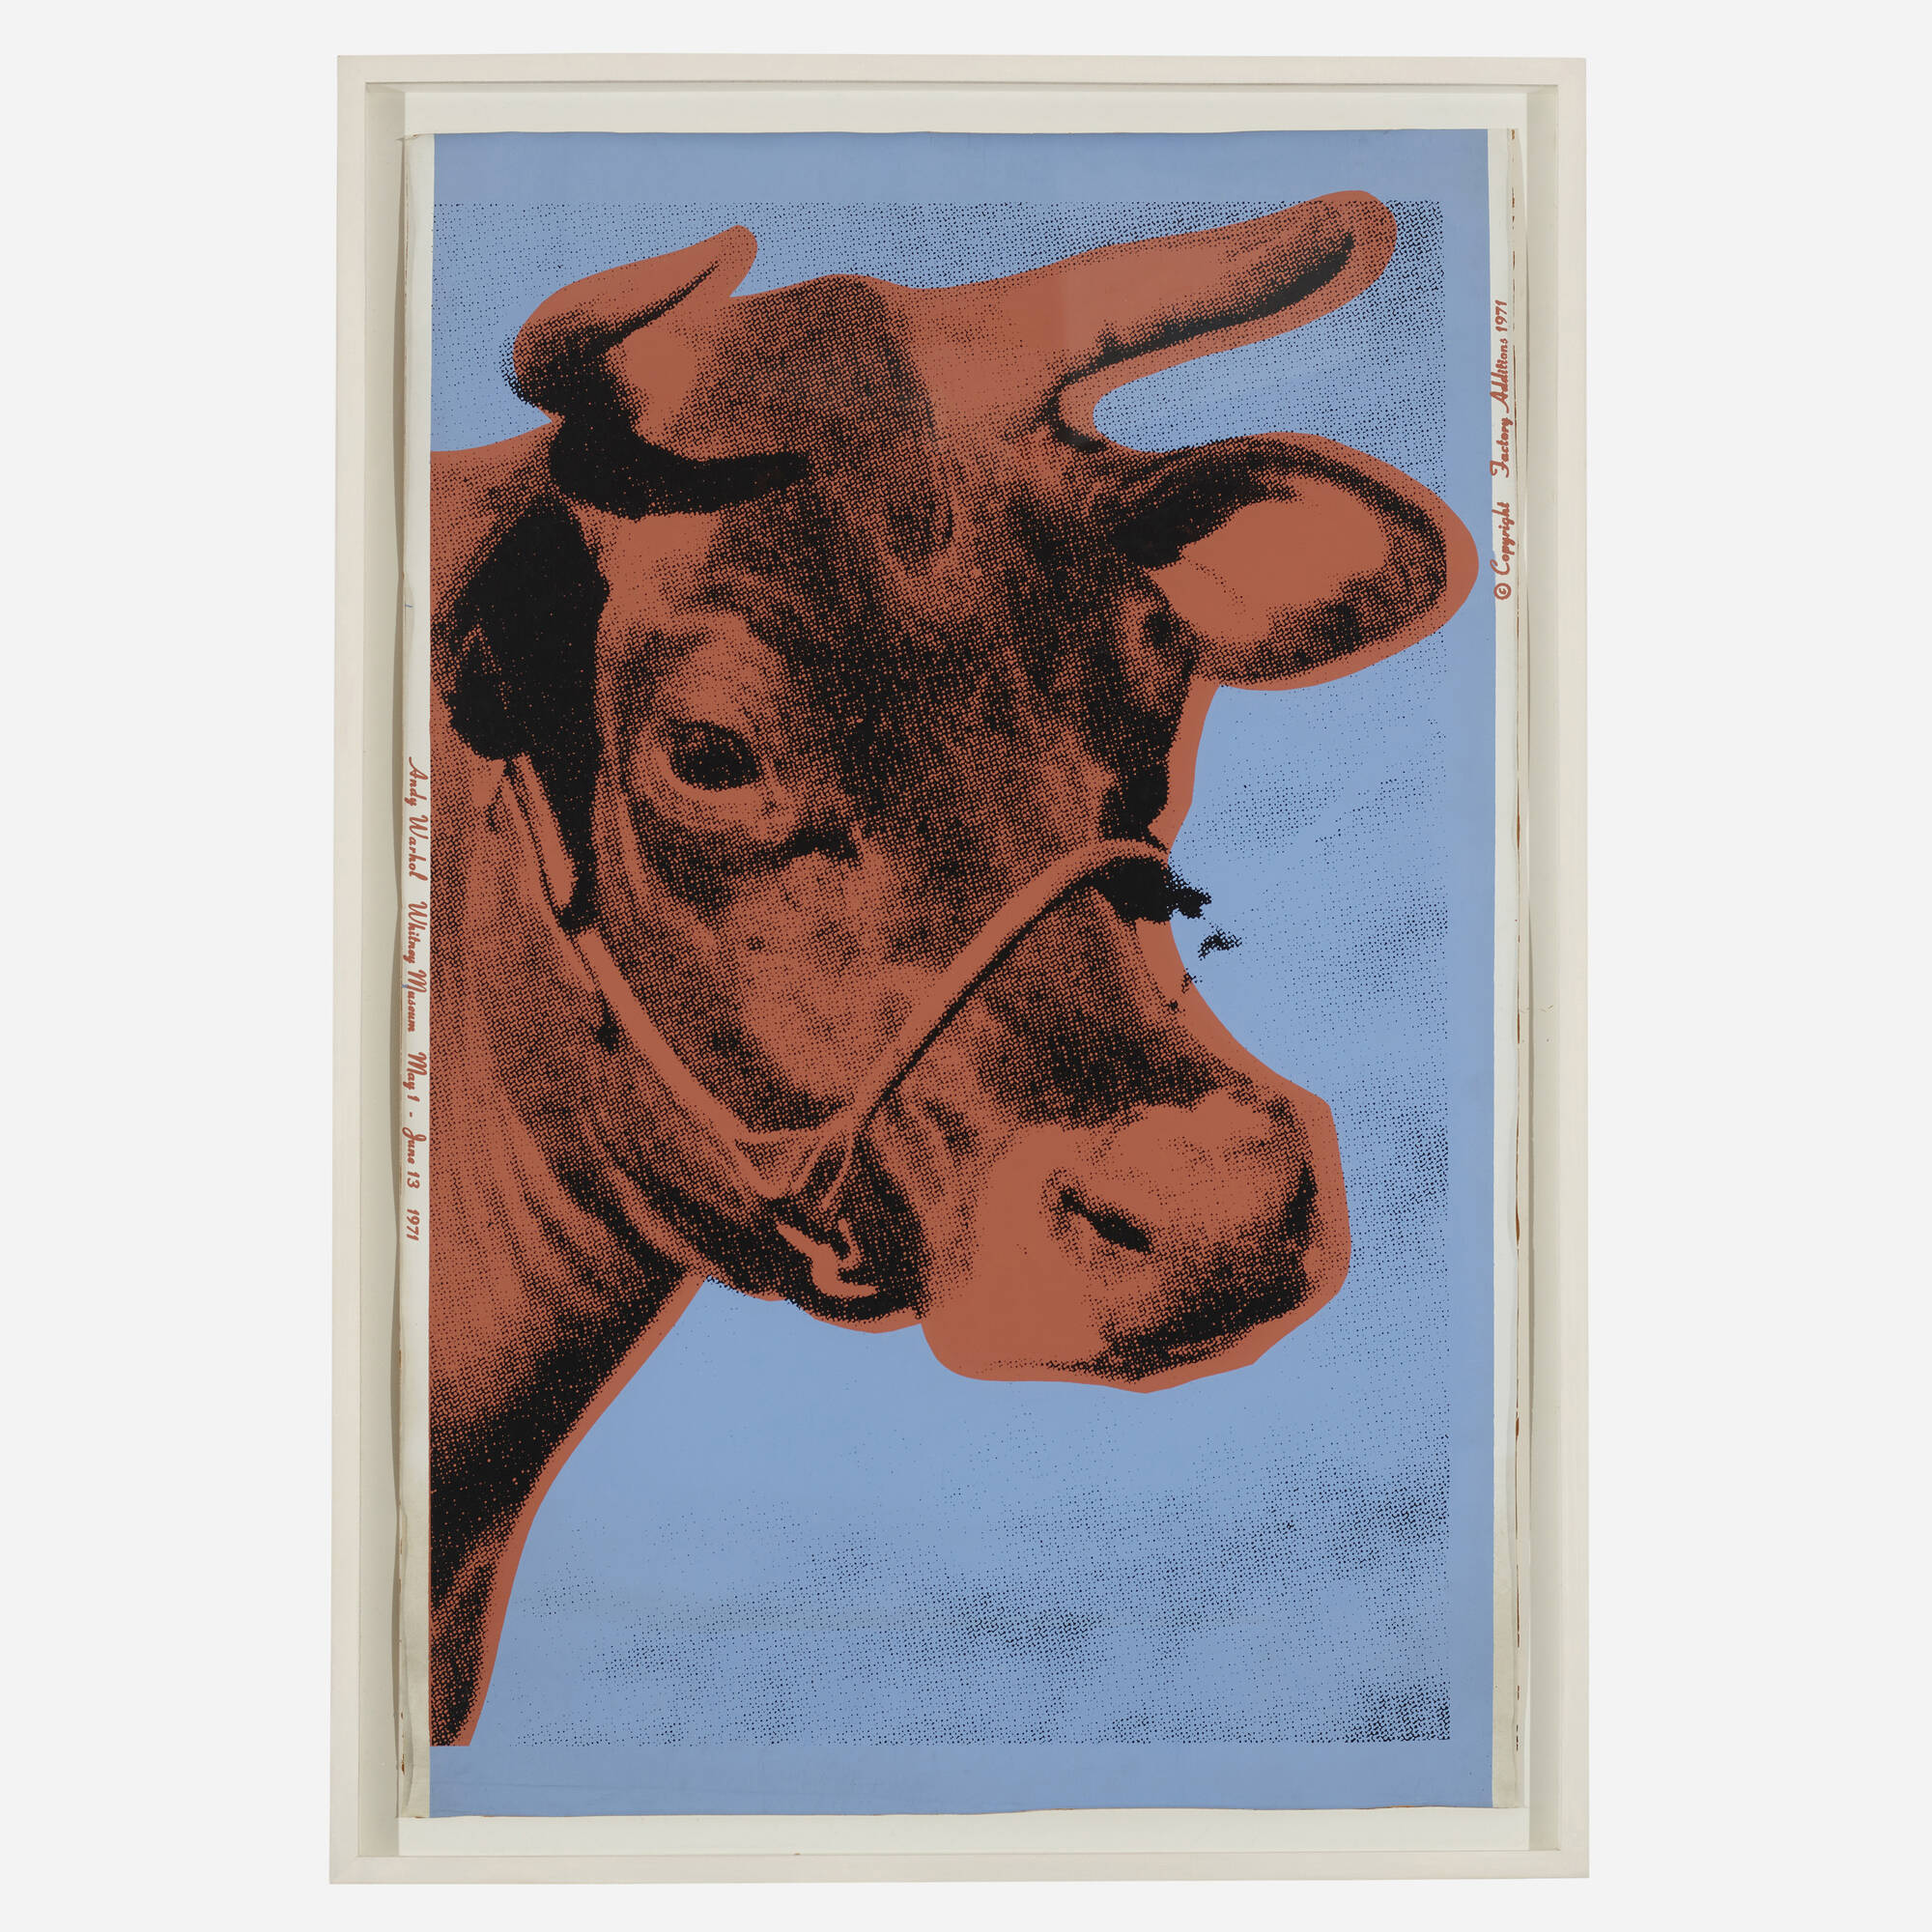 125 Andy Warhol Cow Wallpaper Post War Contemporary Art 10 March 22 Auctions Rago Auctions